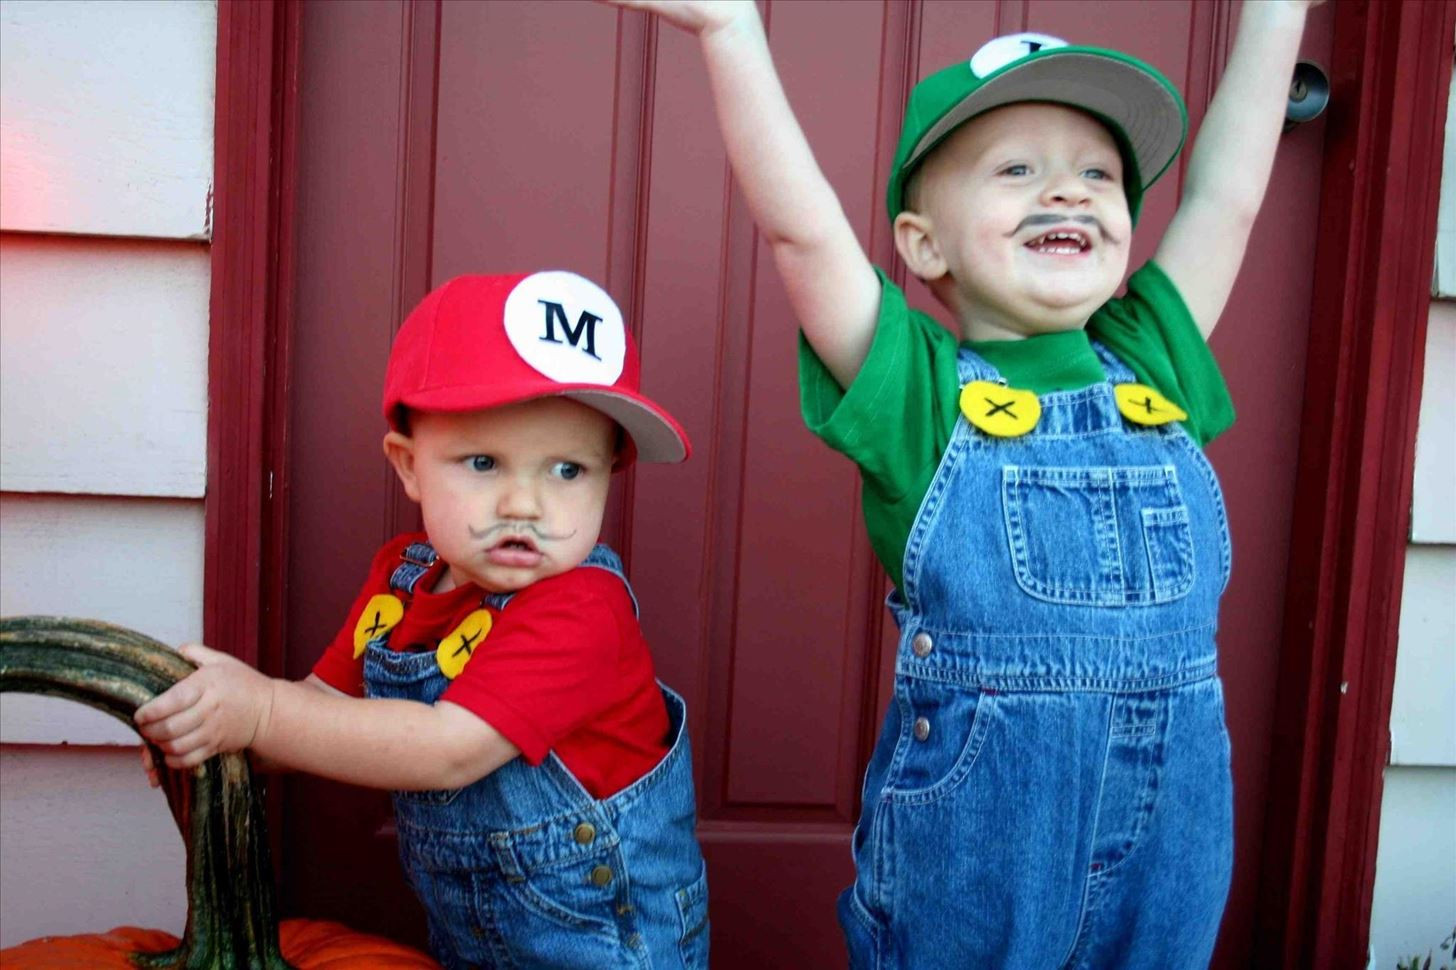 DIY Costume Ideas For Kids
 10 Cheap Easy & Awesome DIY Halloween Costumes for Kids